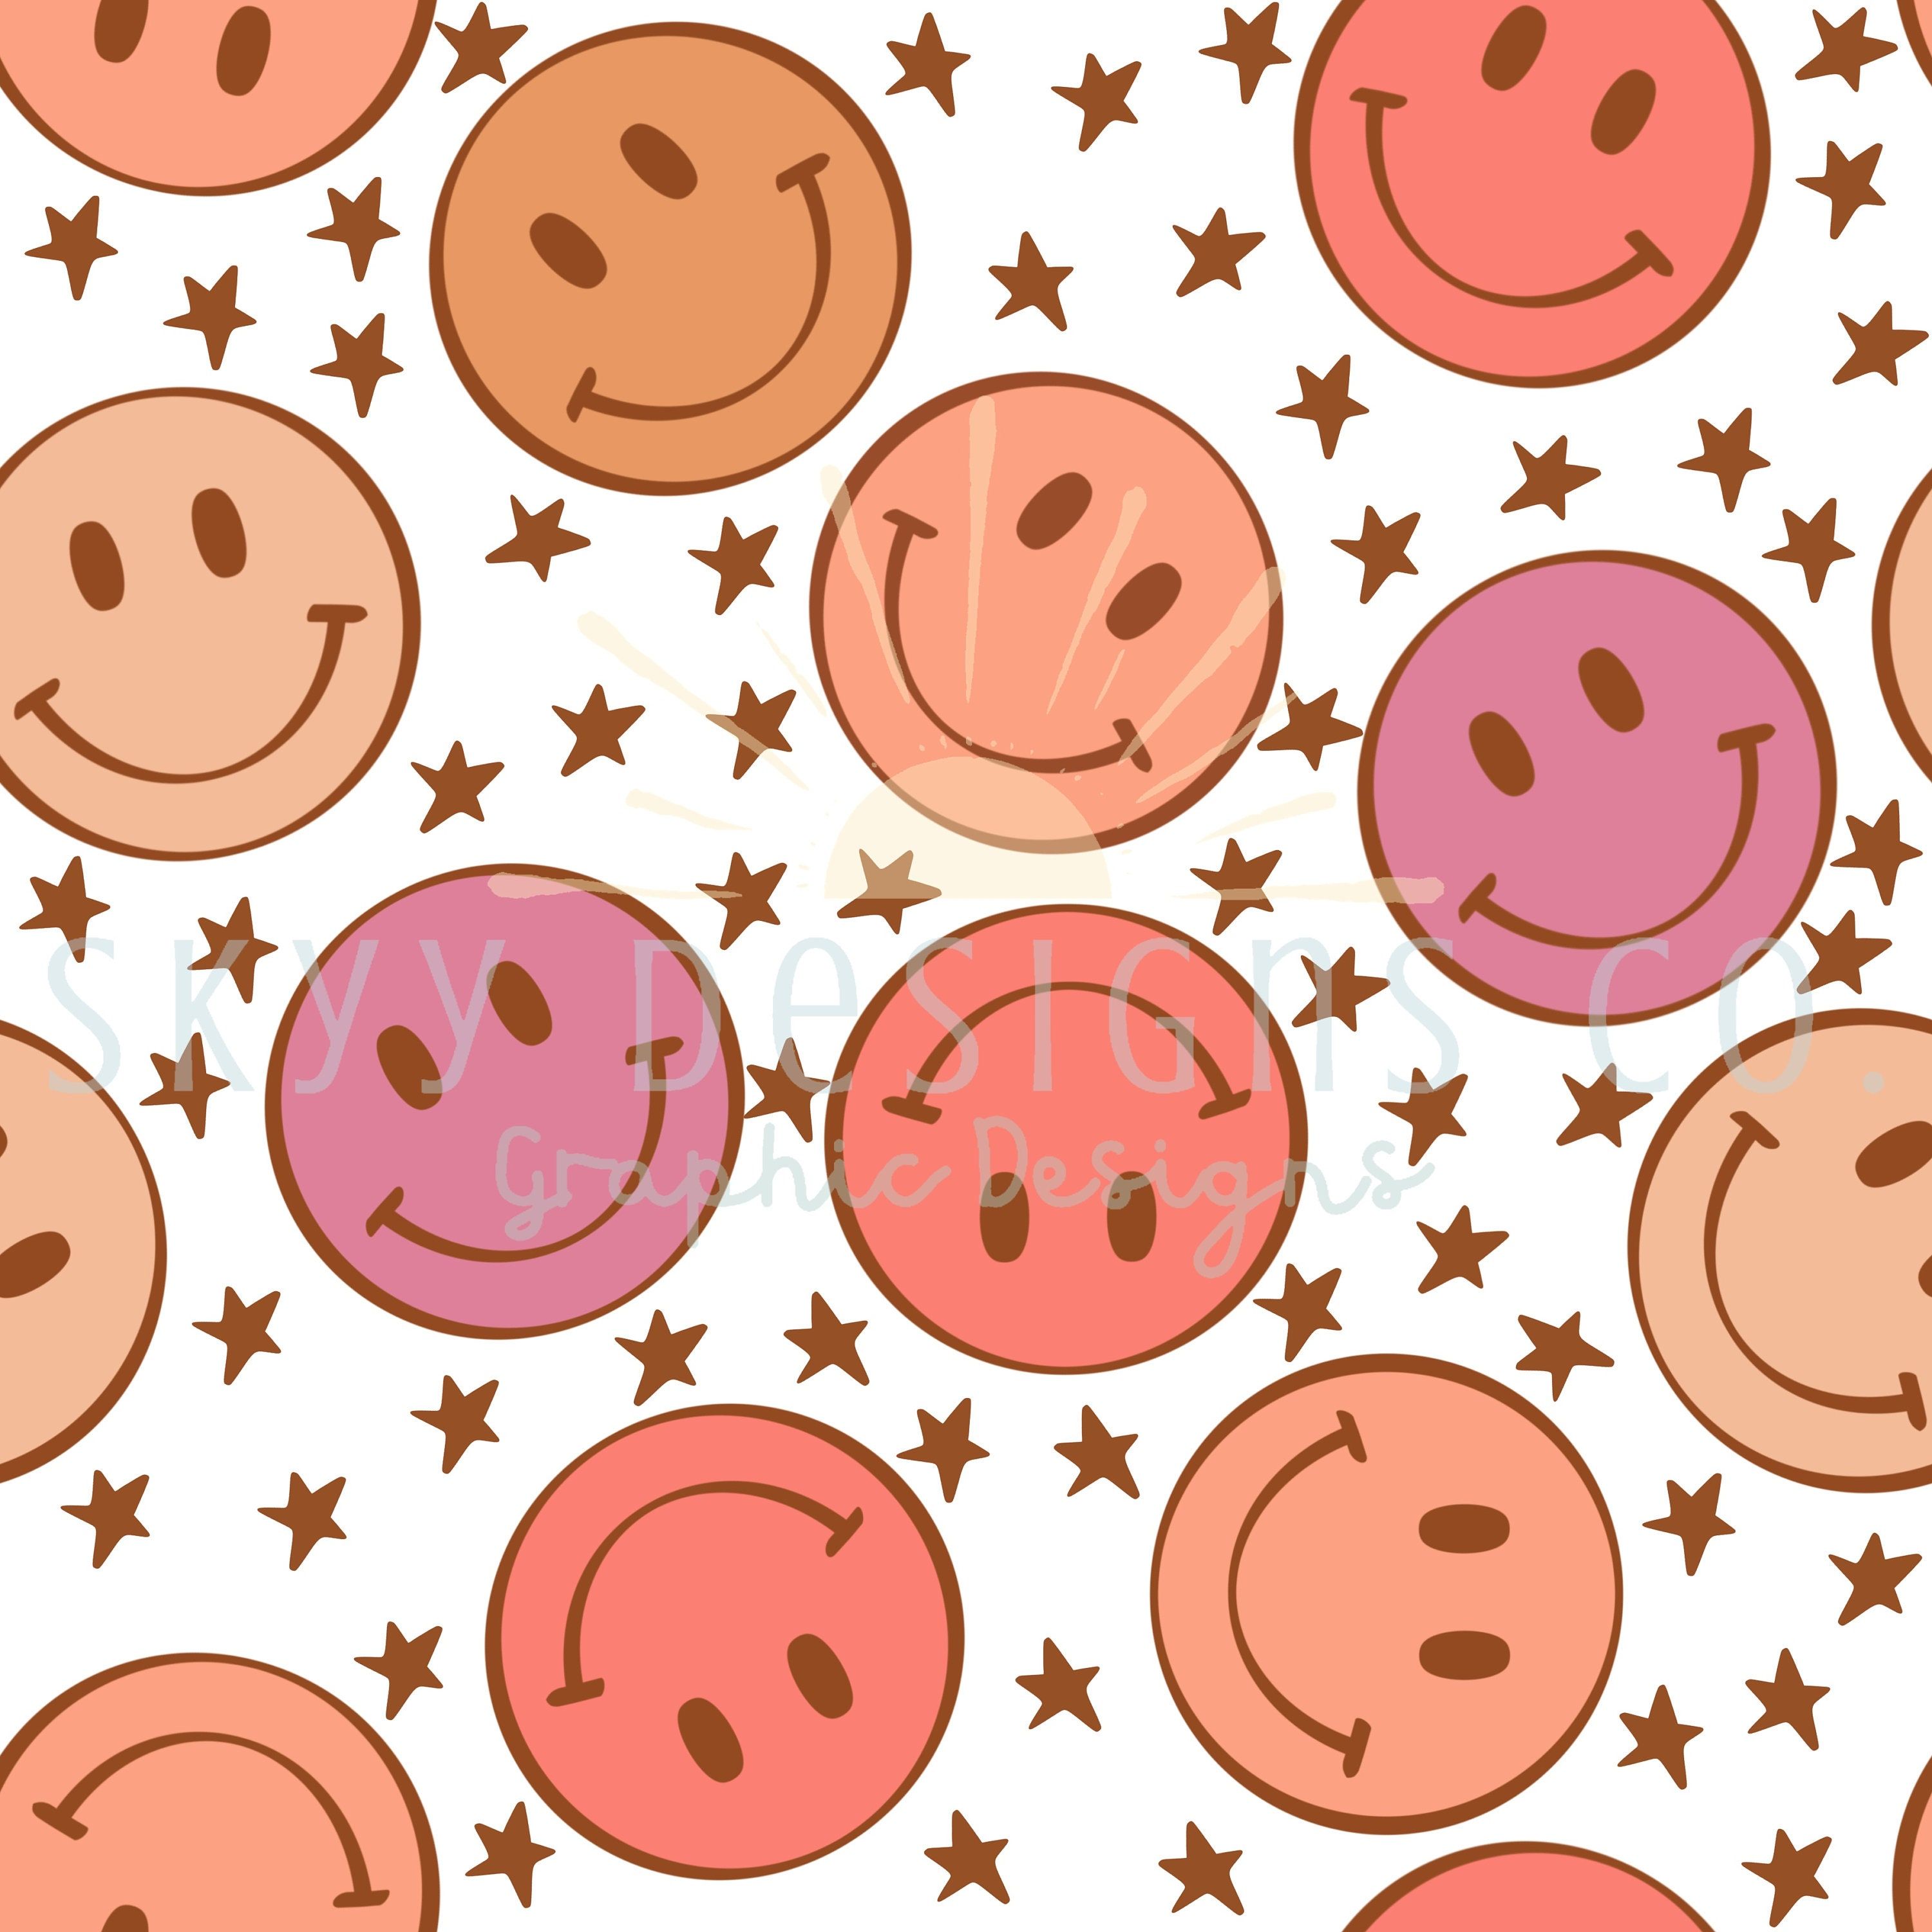 A seamless pattern of happy faces and stars in shades of pink and peach - Smiley